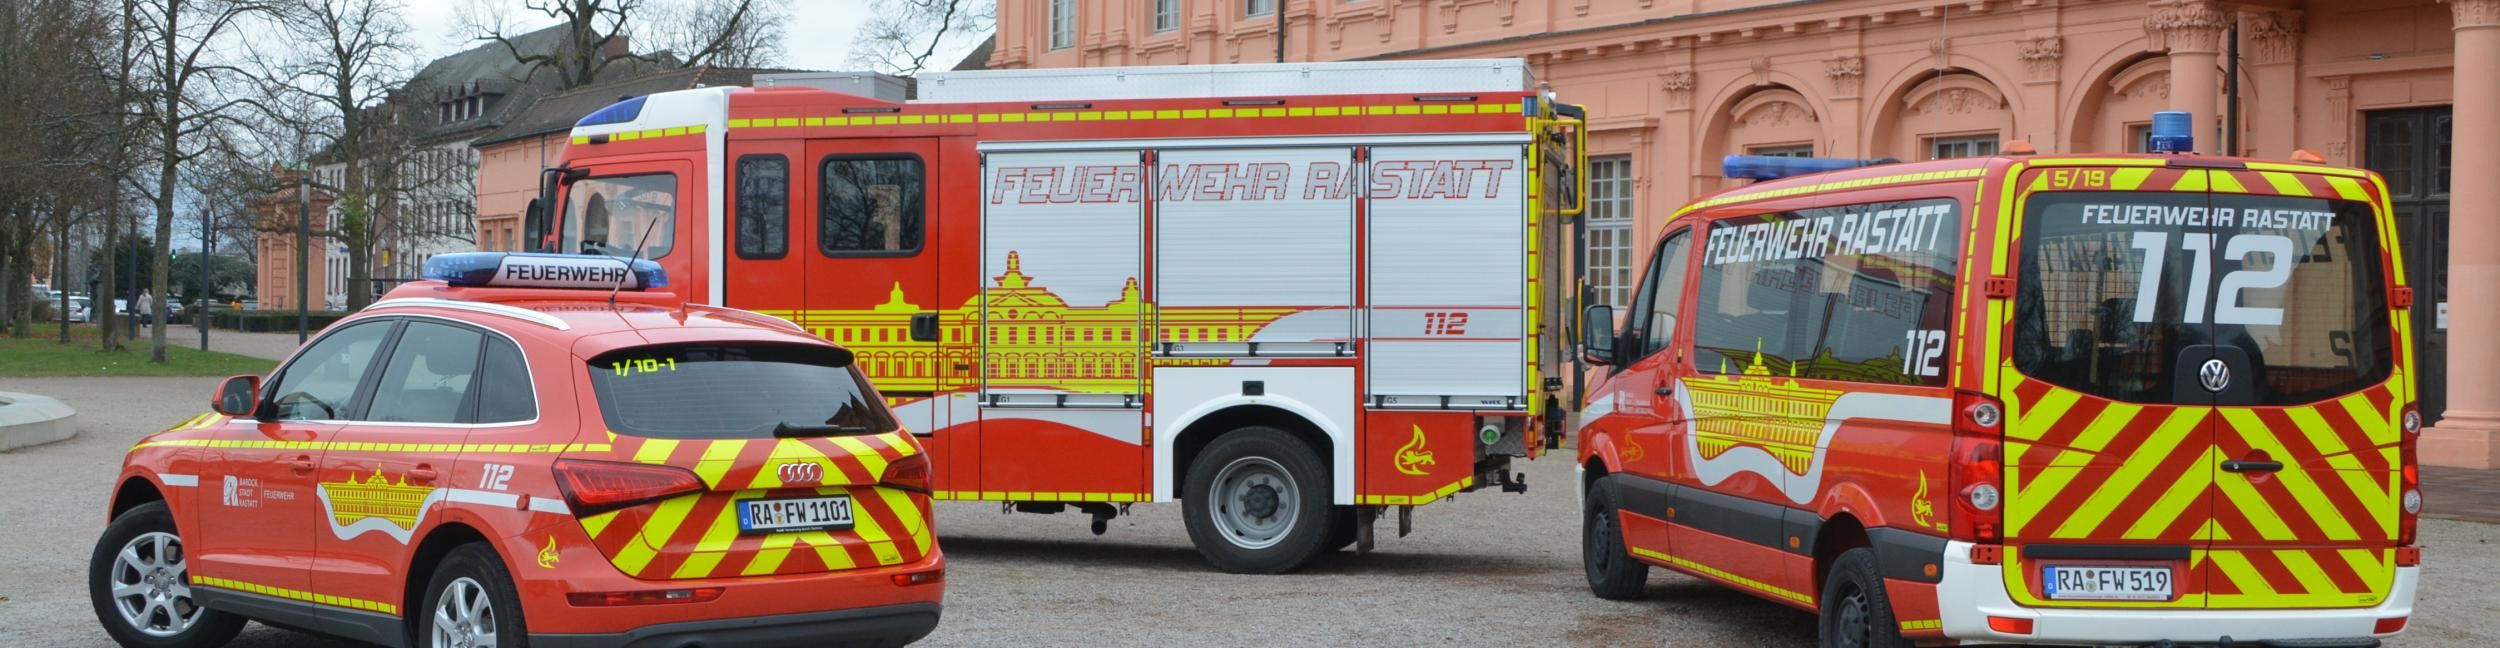 Emergency vehicle in front of the castle